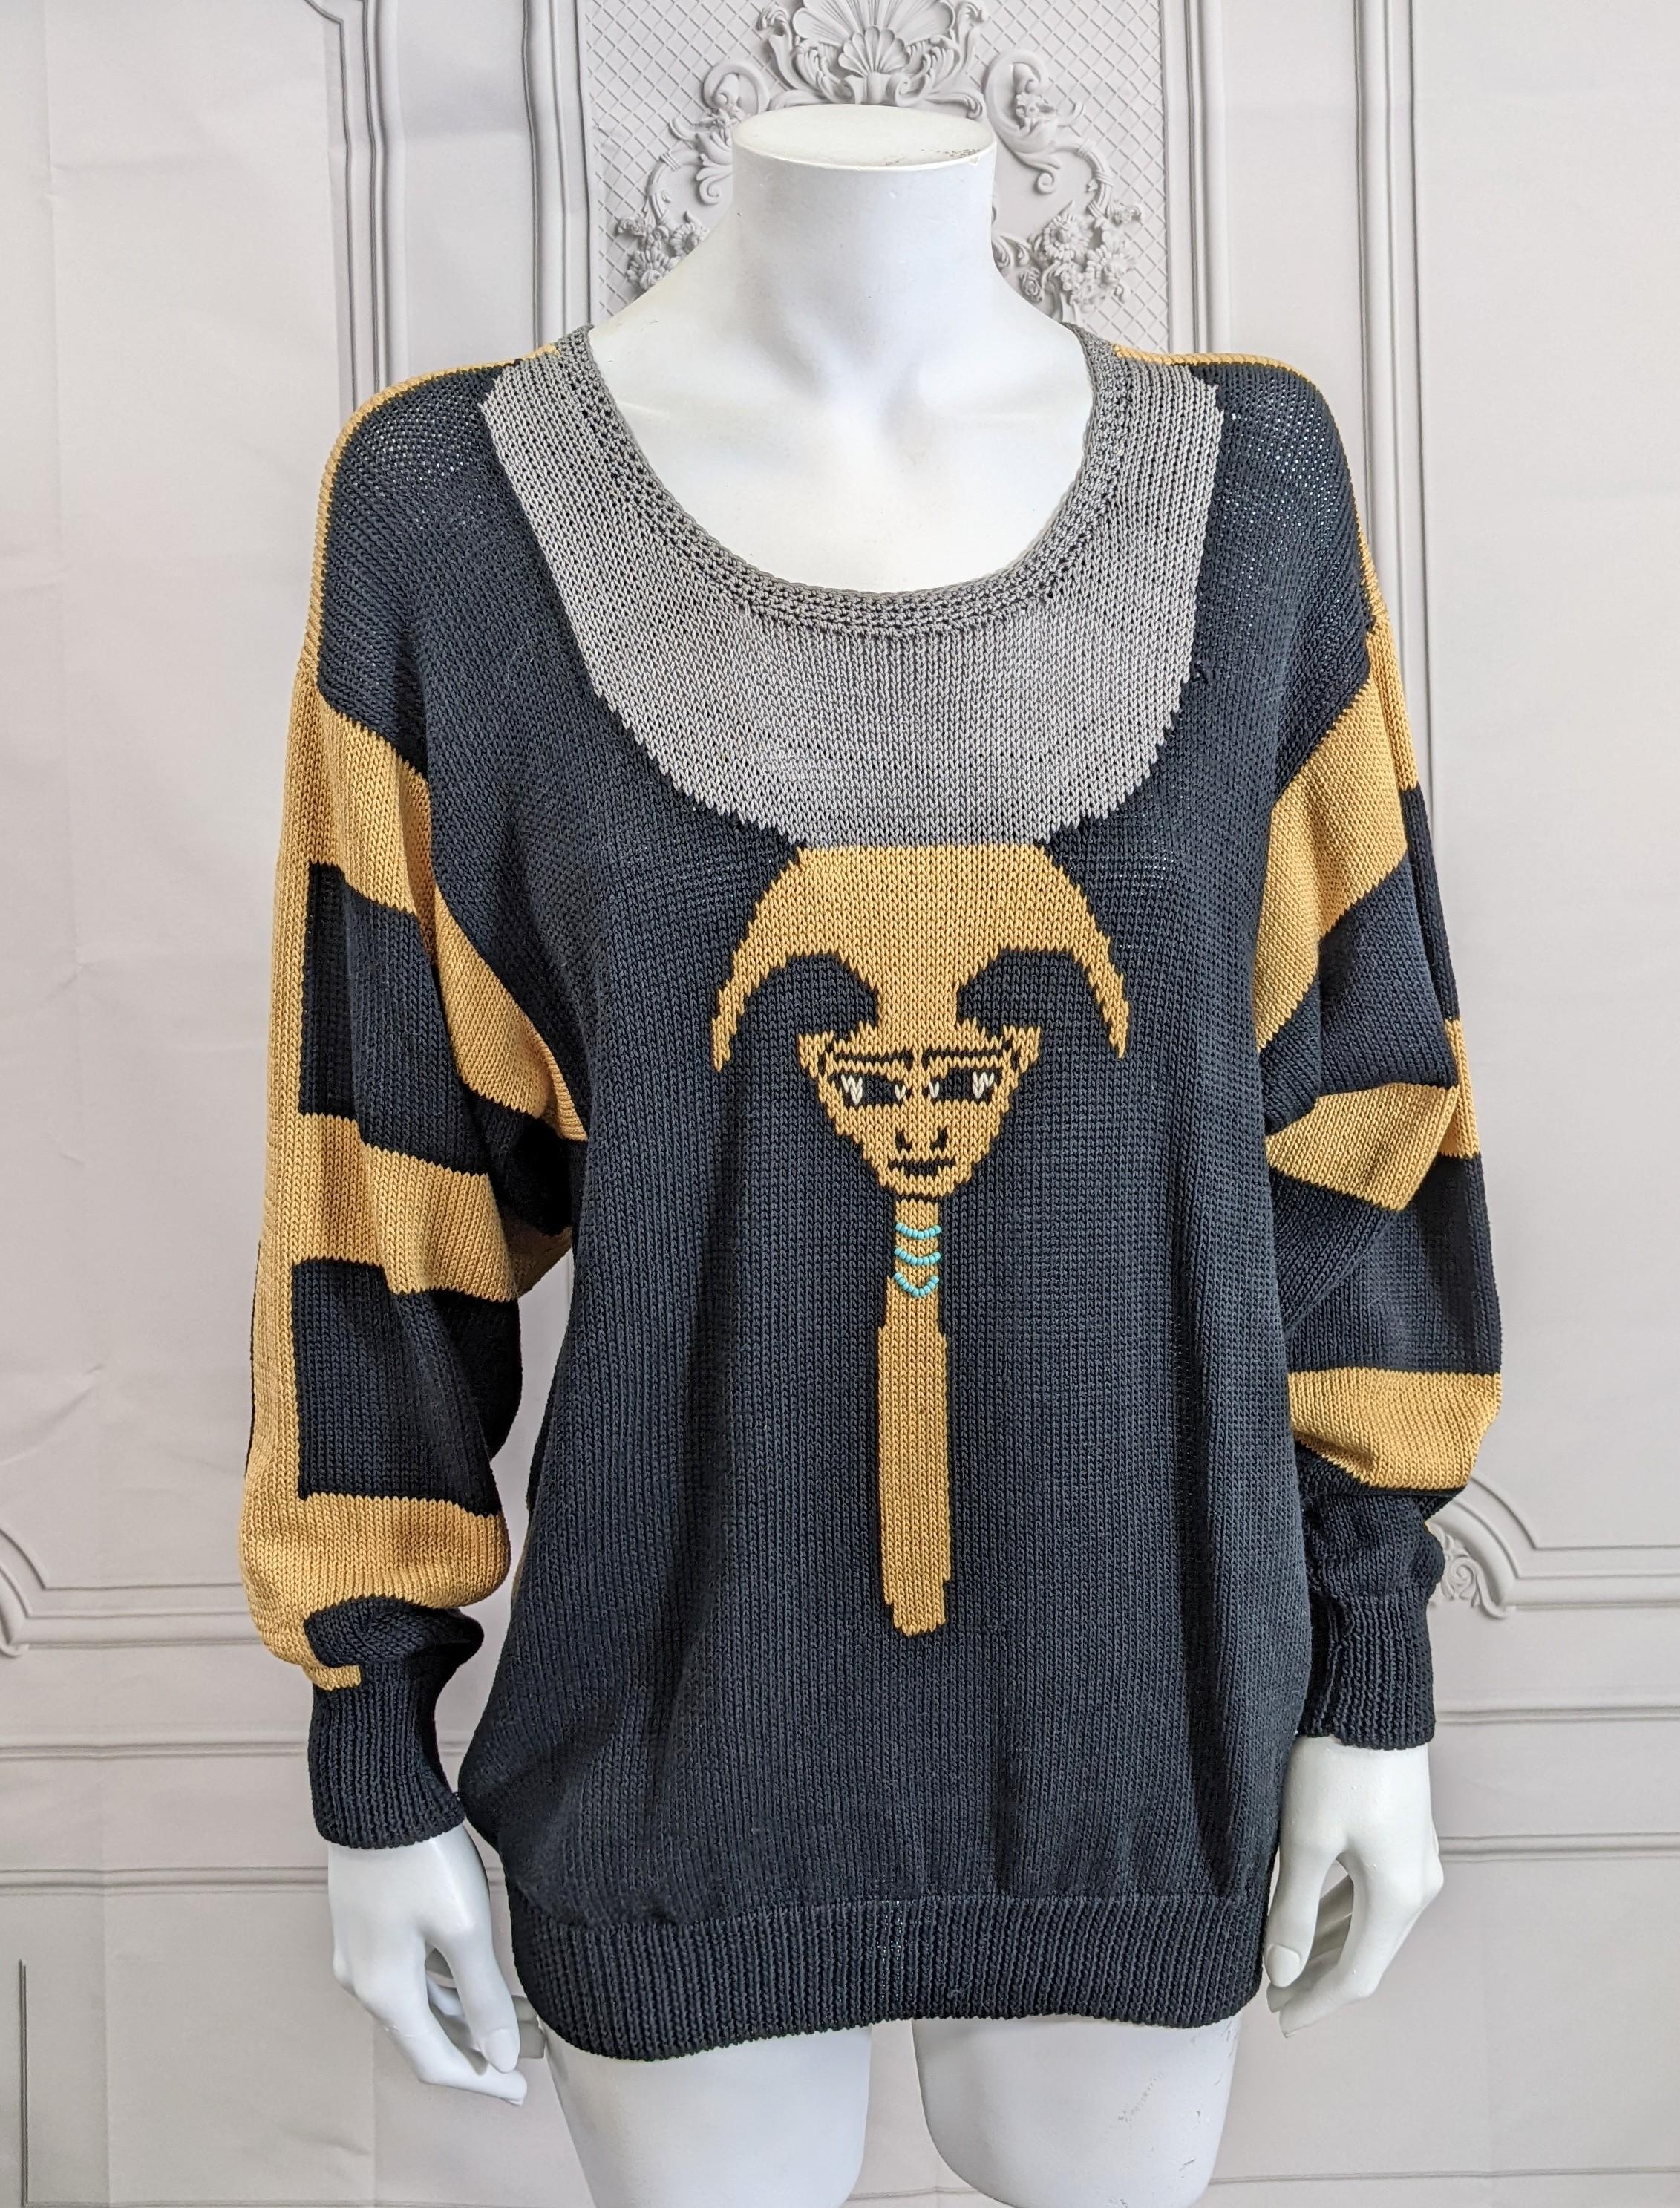 Charming and unusual Handknit Cotton Eygptian Themed Sweater by Dia North of Boston circa 1980's. Motifs knitted in black, grey and gold with central god adorned with turquoise beadwork.  Size Small-Medium. Vermont 1980's.
26